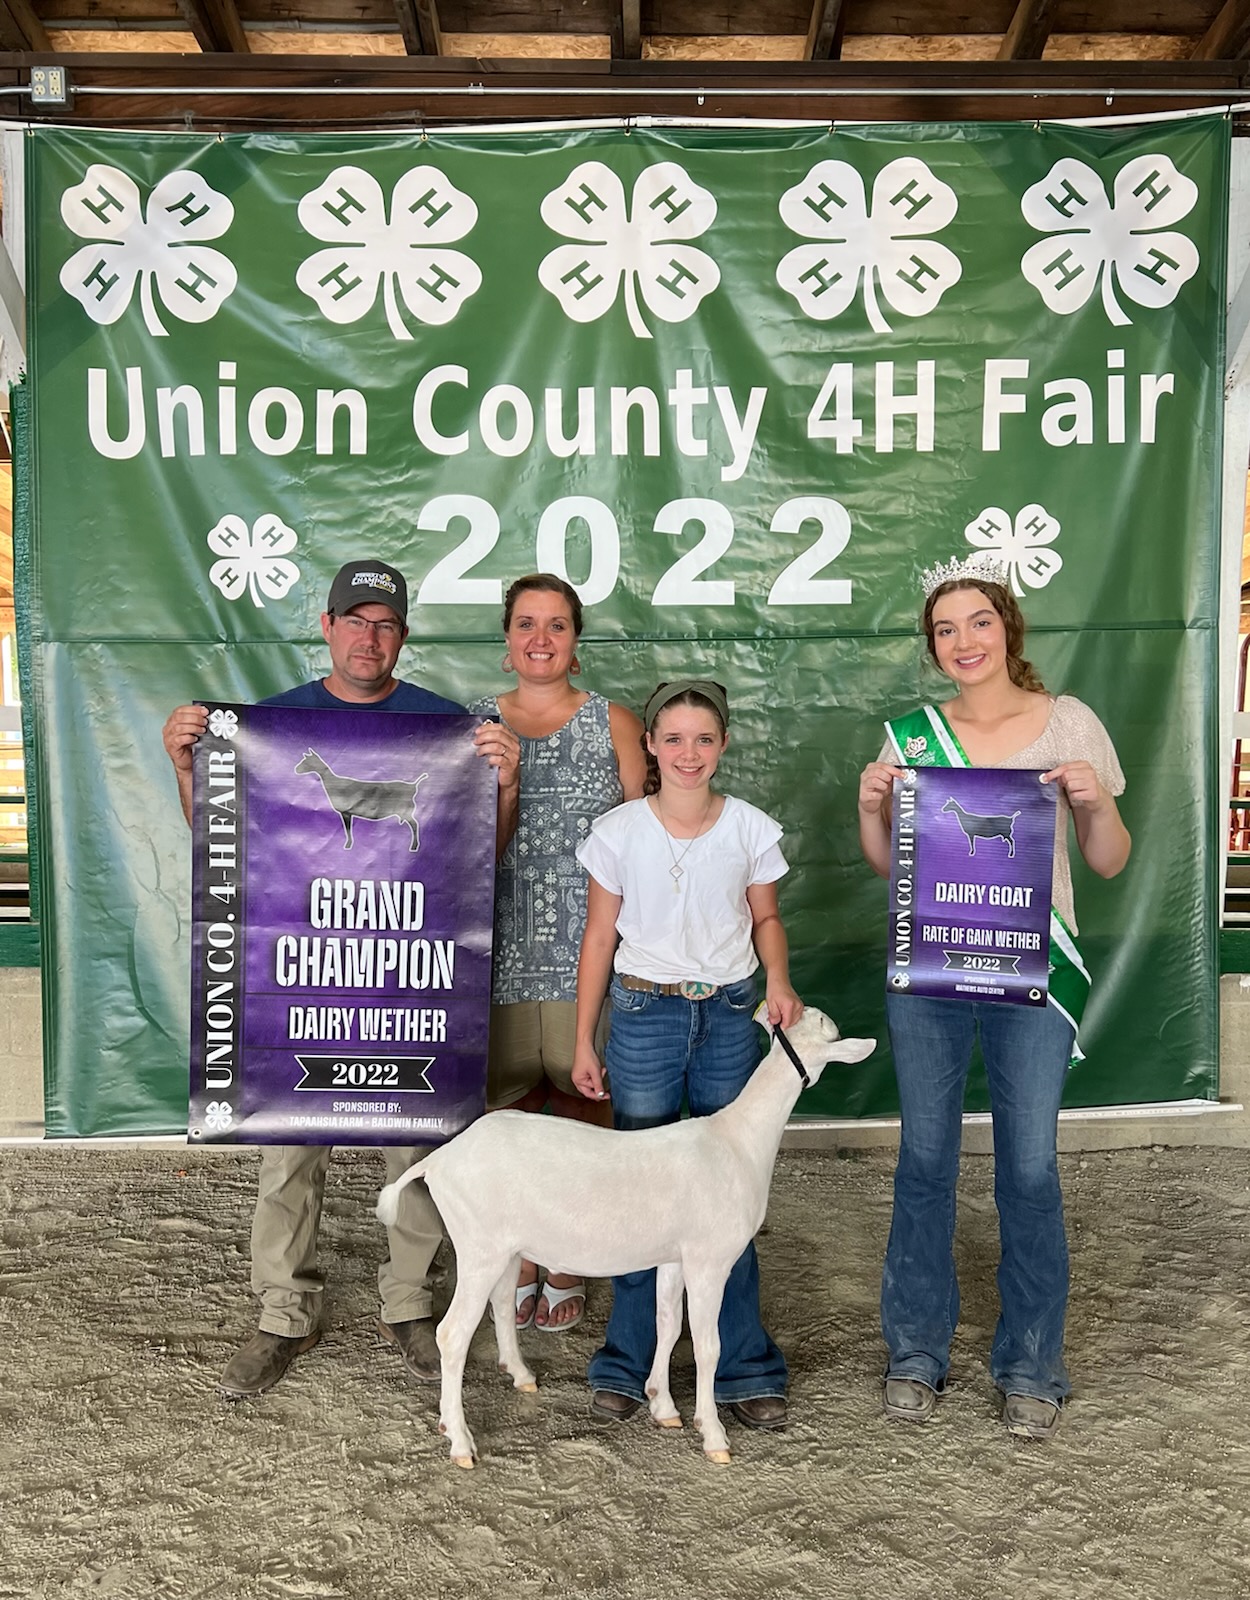 Grand Champion Dairy Wether, 2022 Union County 4H Fair